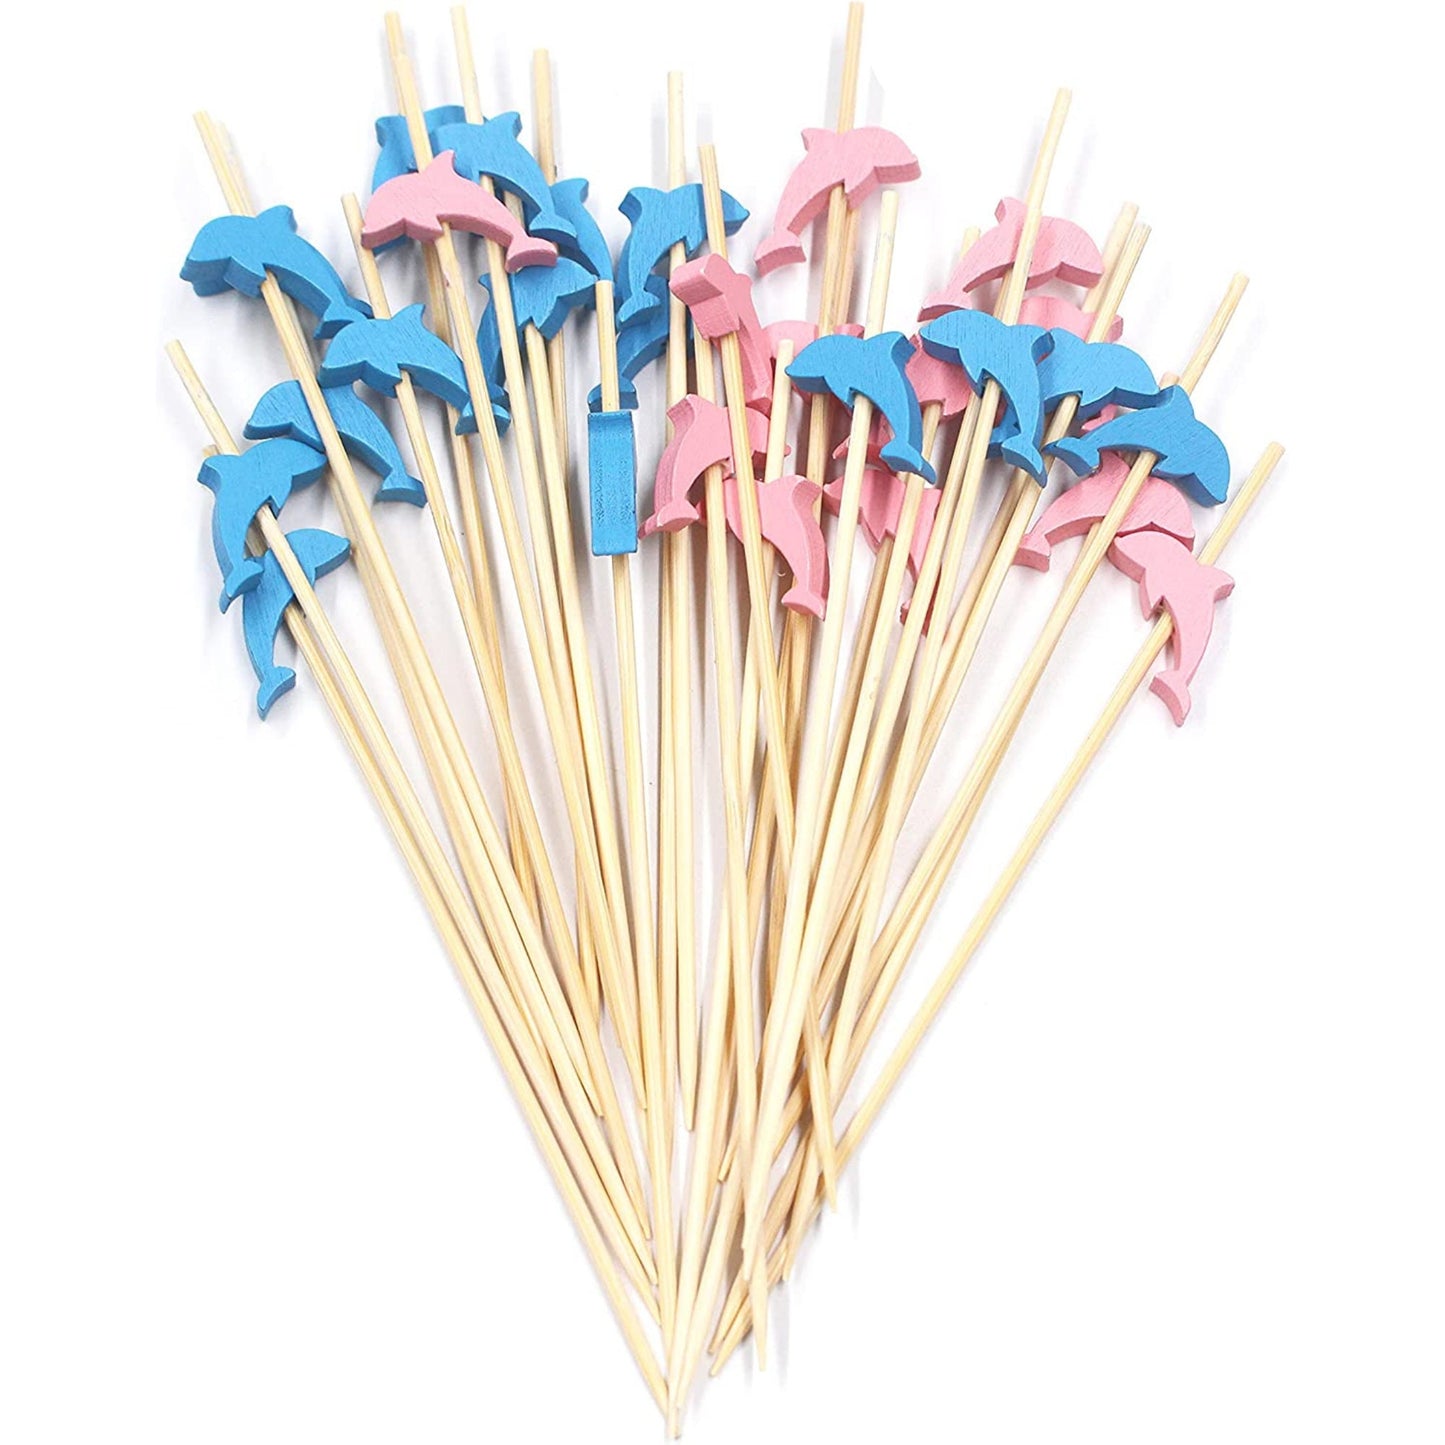 Assorted Style Charcuterie Toothpicks - Pink Flamingo, Stetsonia Cactus, and More! Fancy Toothpicks for Charcuterie and Appetizers - Wedding, Buffet, Shower - Elegant Party Decor